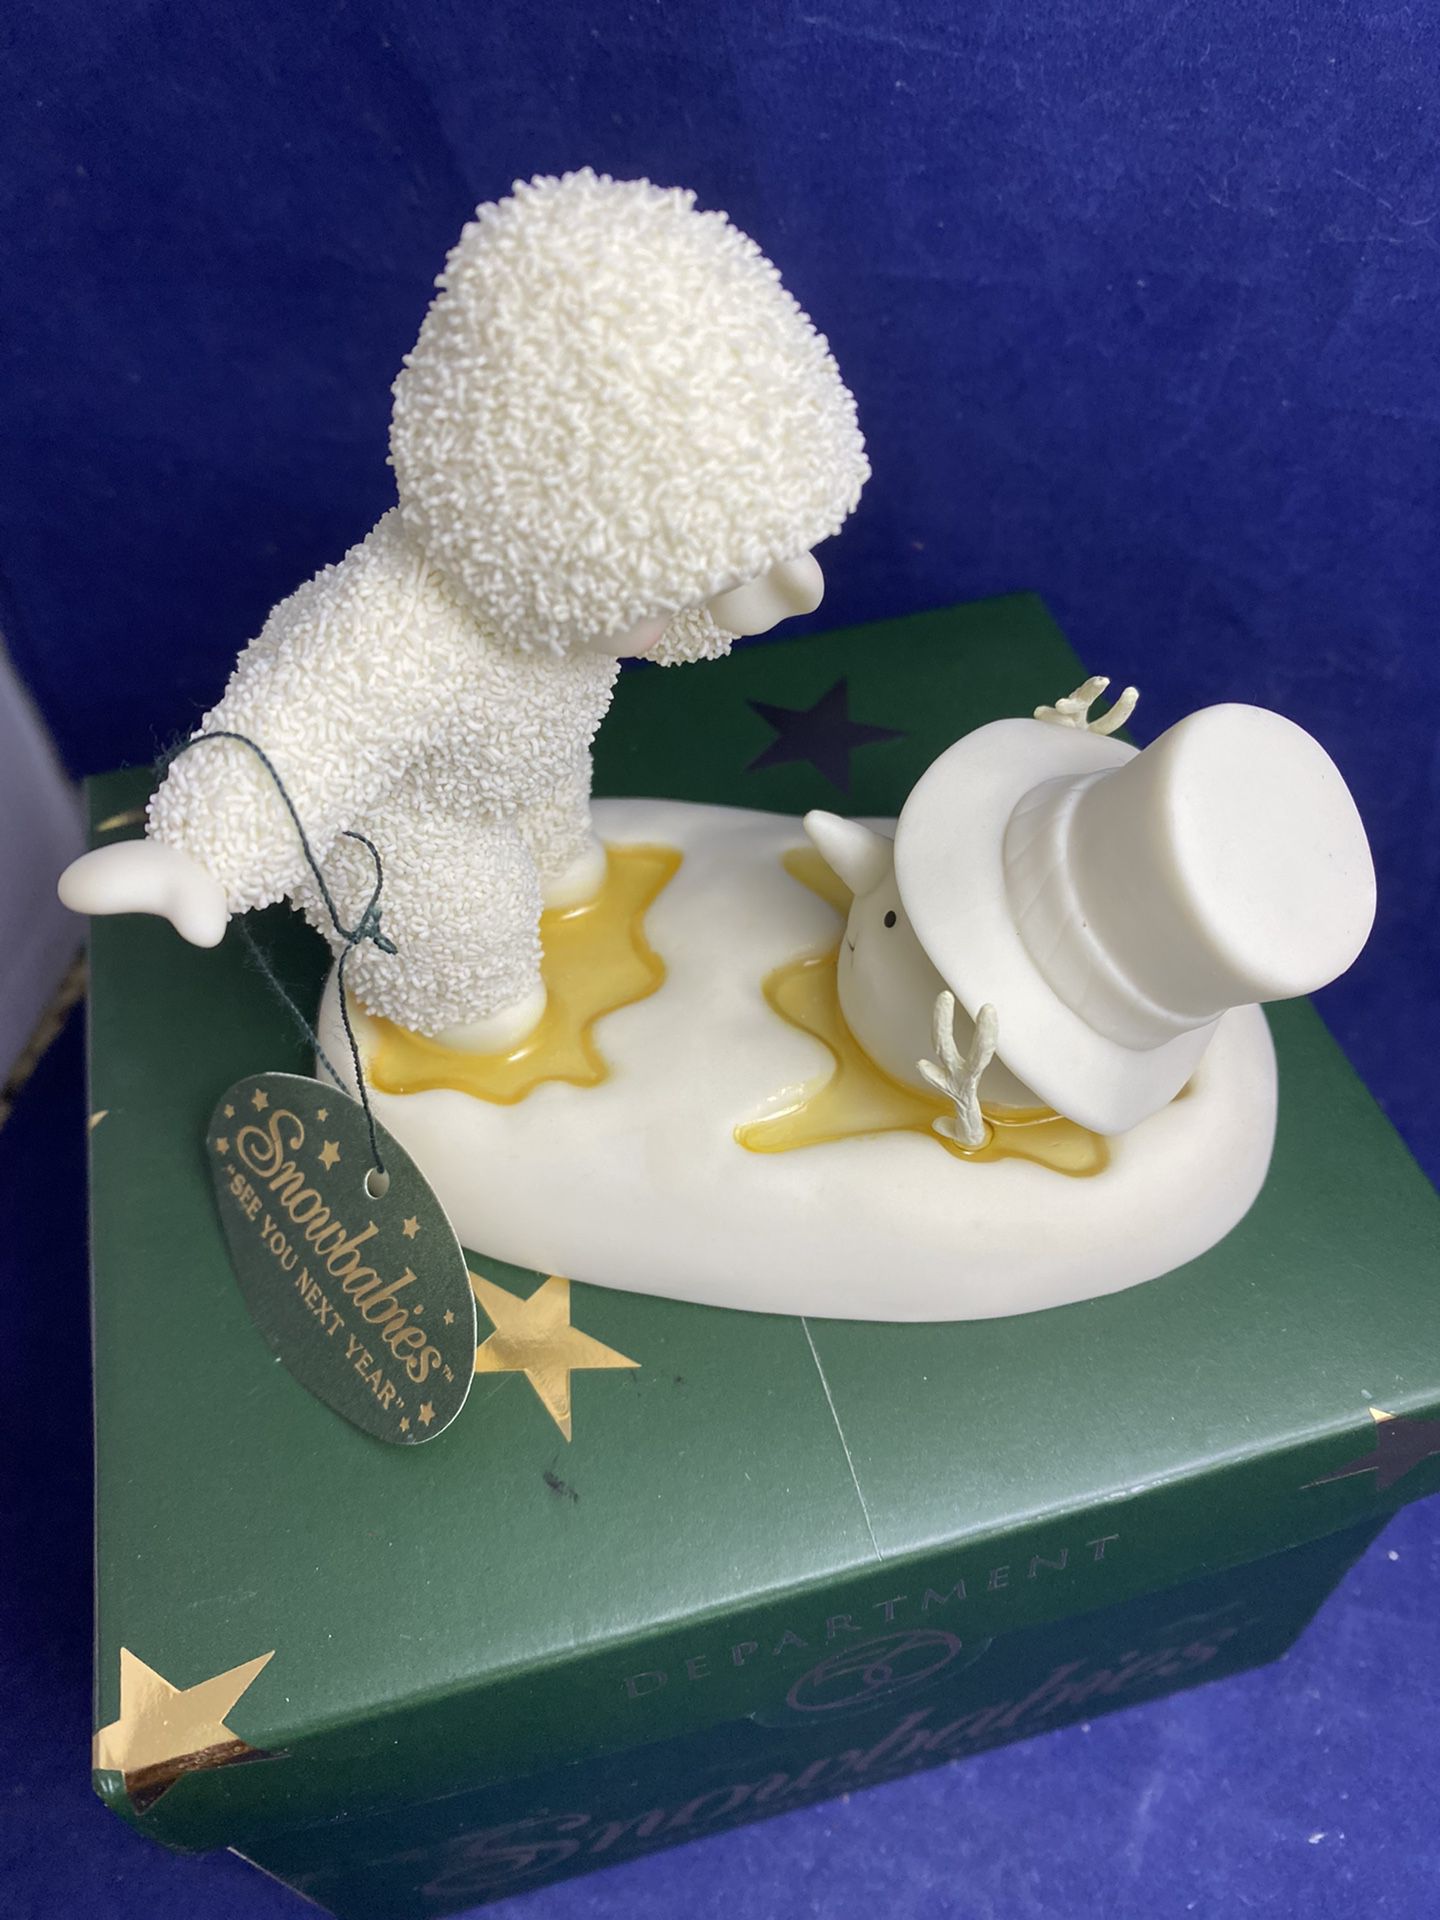 Dept 56 Snowbabies "See You Next Year" Christmas Figurine